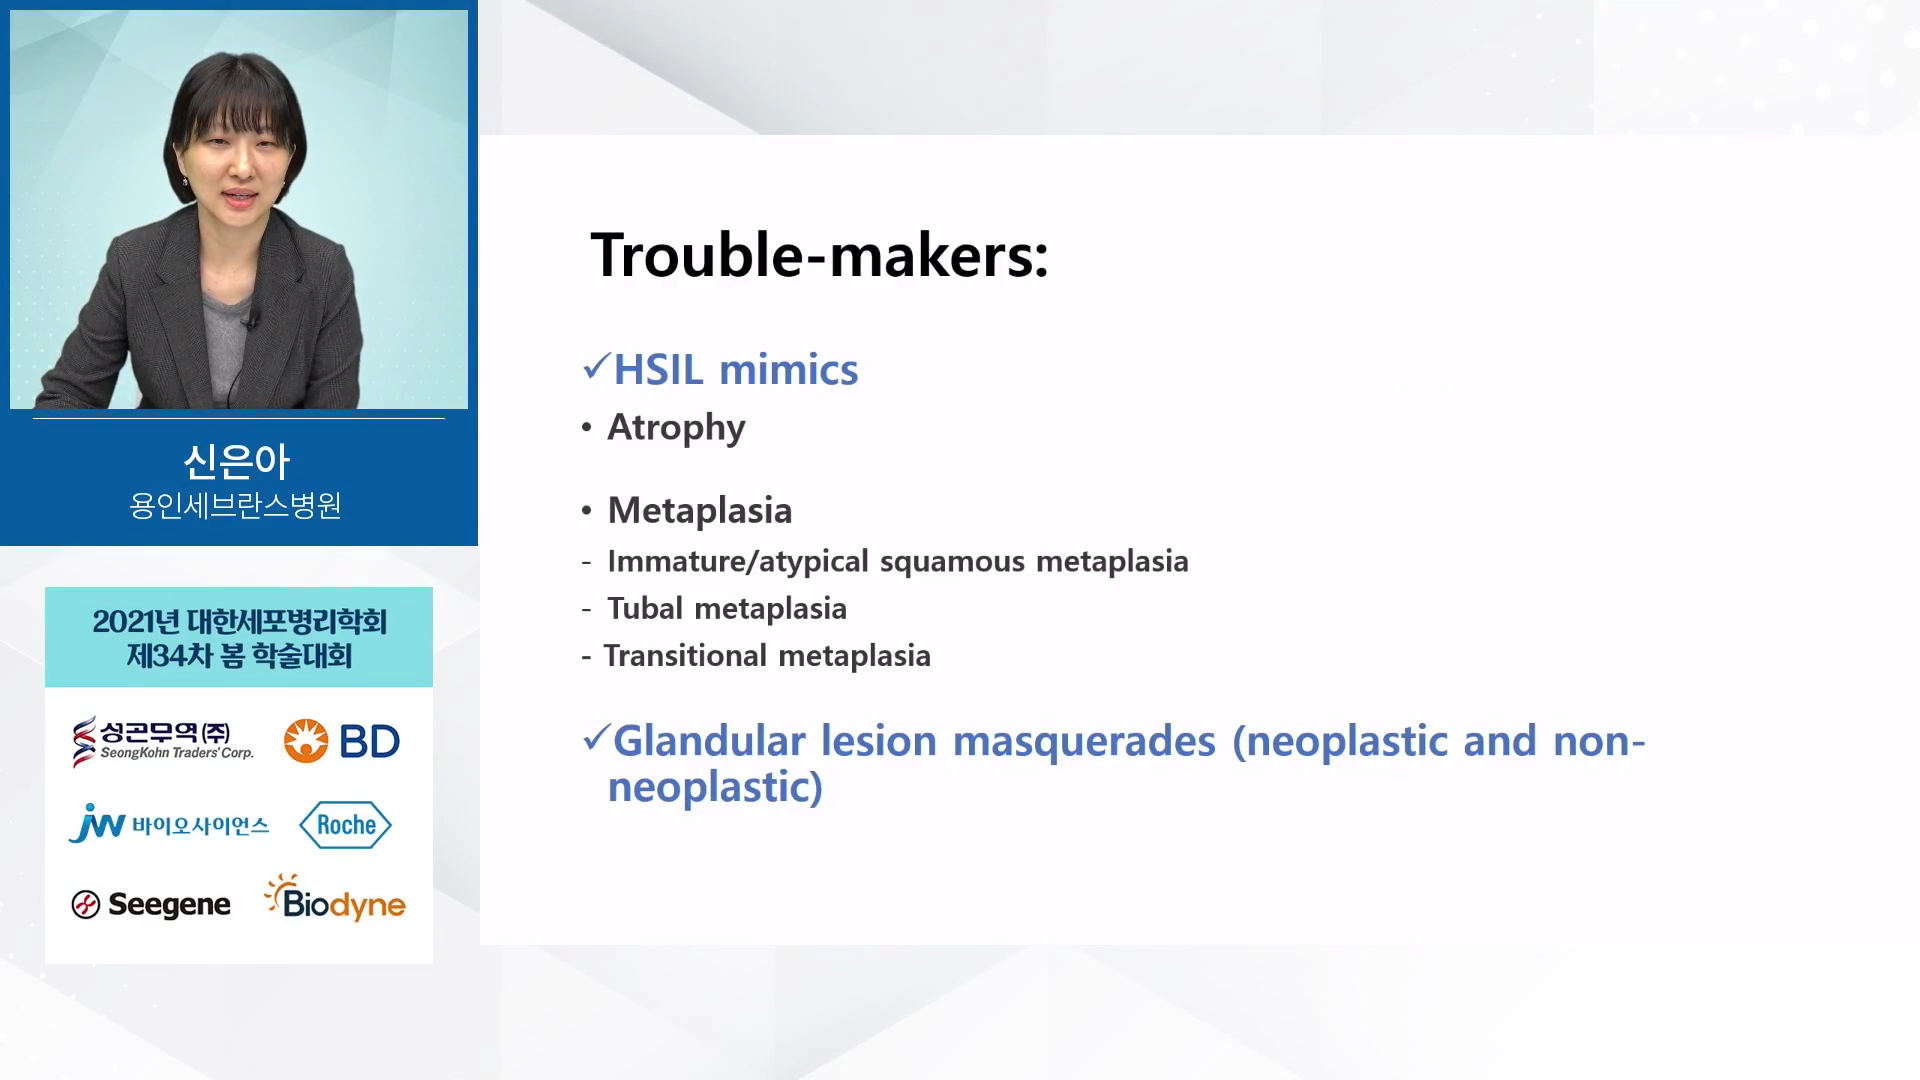 Trouble-makers in gynecologic cytology: correlation with histology